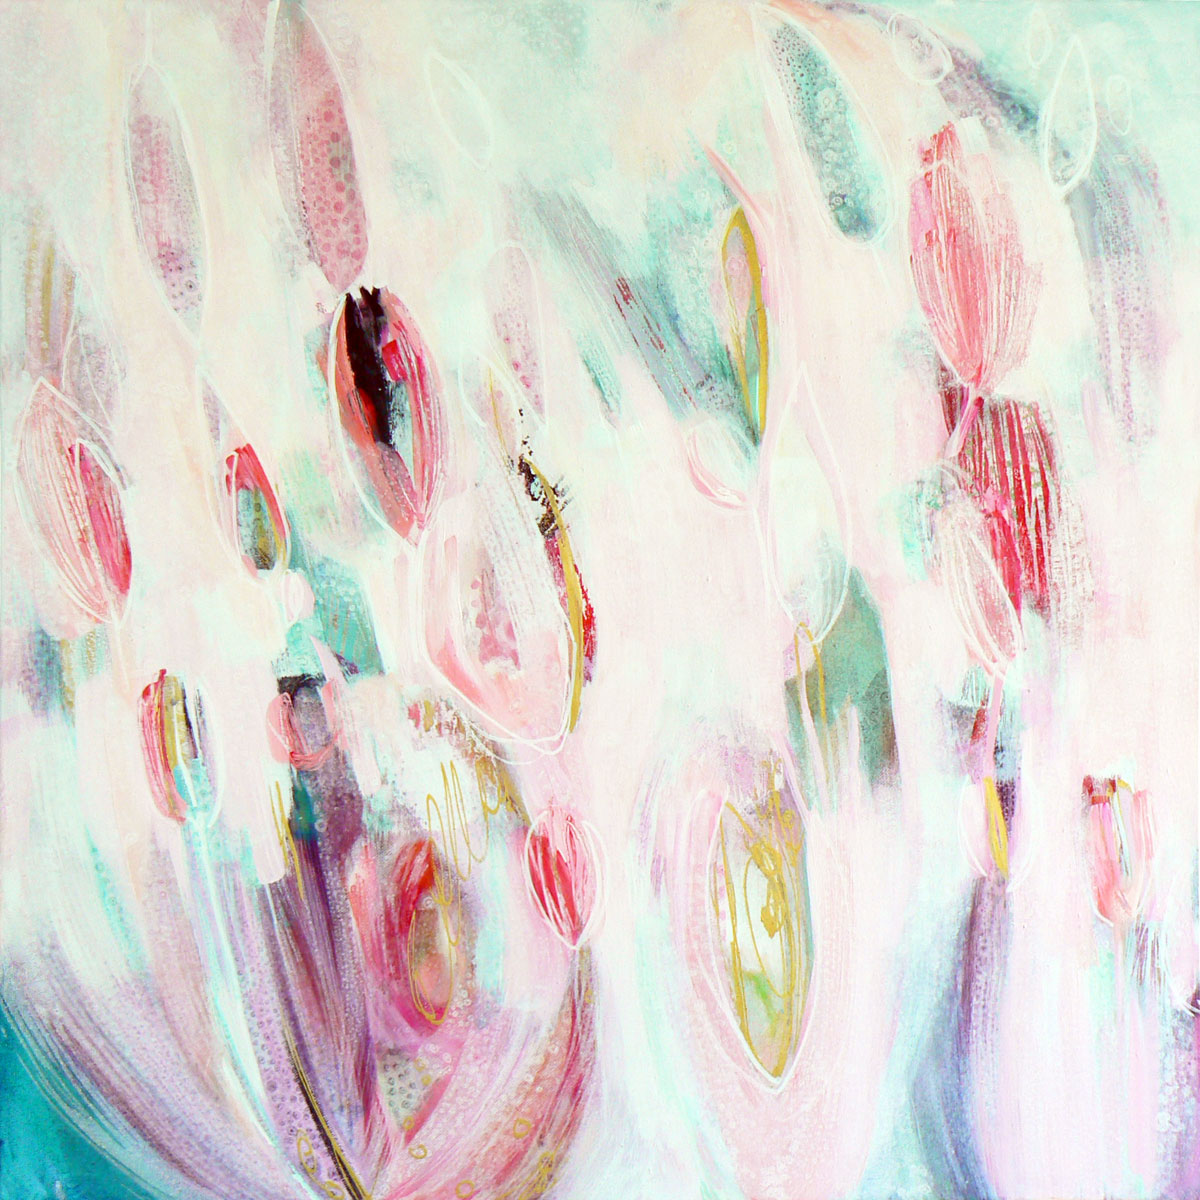 Whisper it softly, 2015 Acrylic painting by Carolynne Coulson